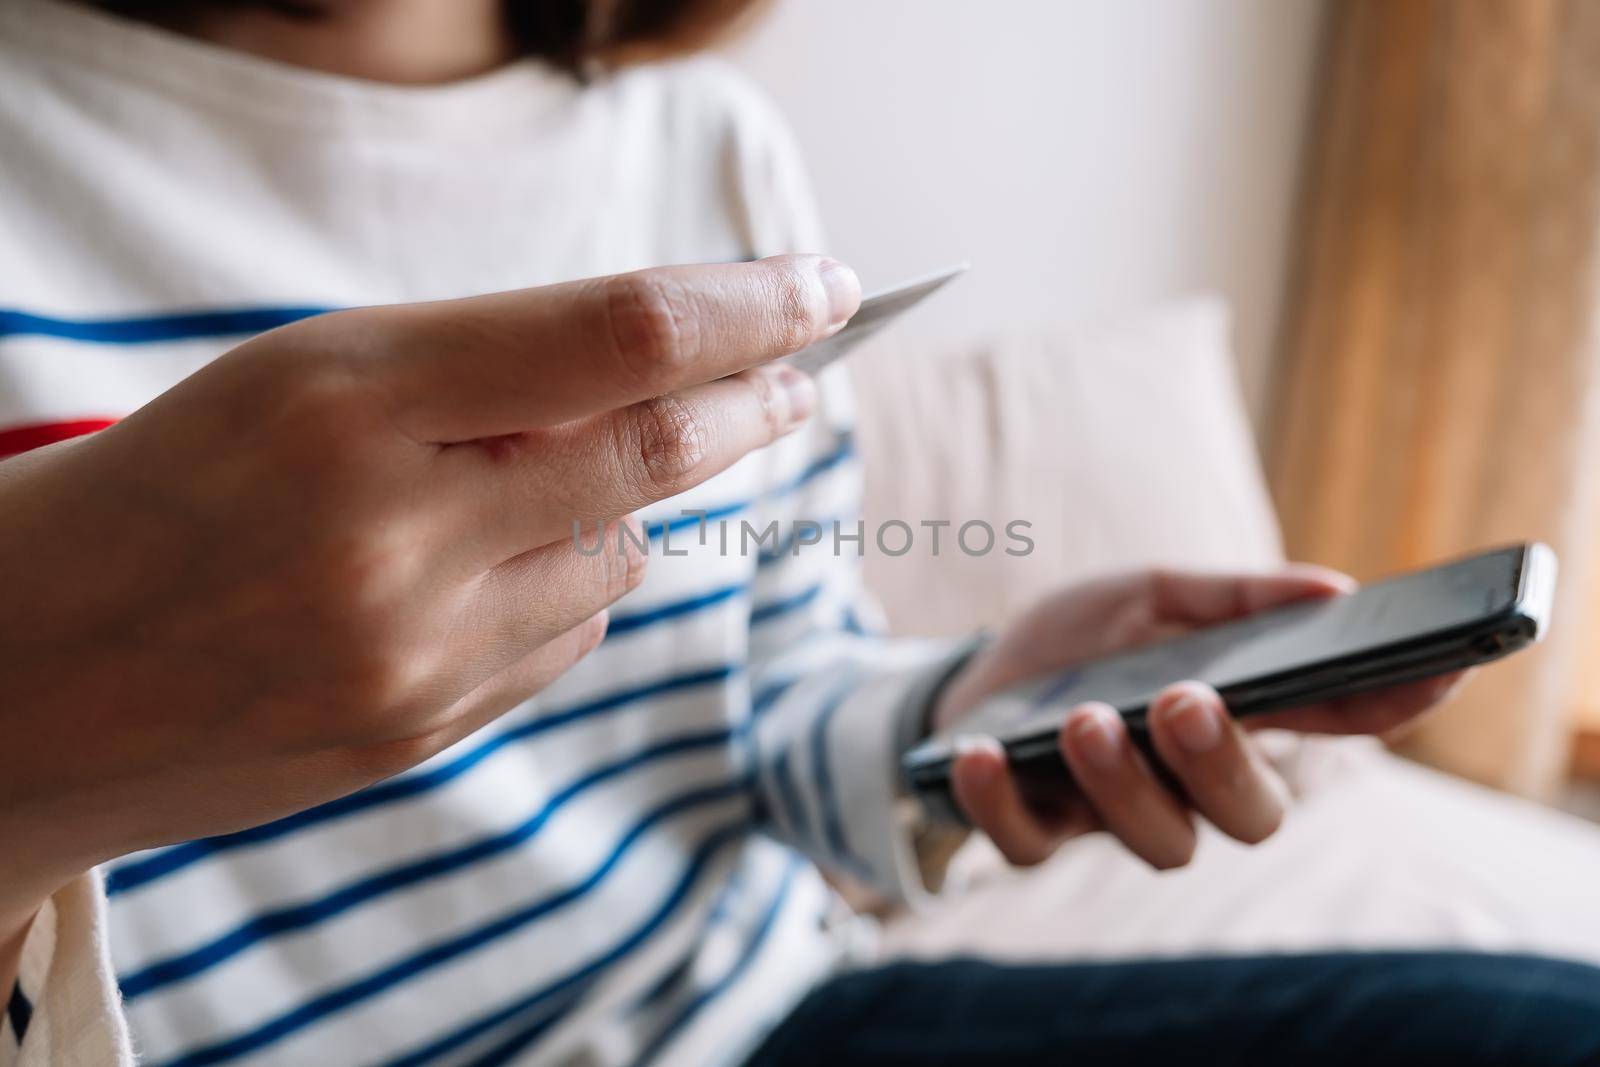 Online shopping payment,Woman's hands holding a smart phone and credit card and for online shopping at home